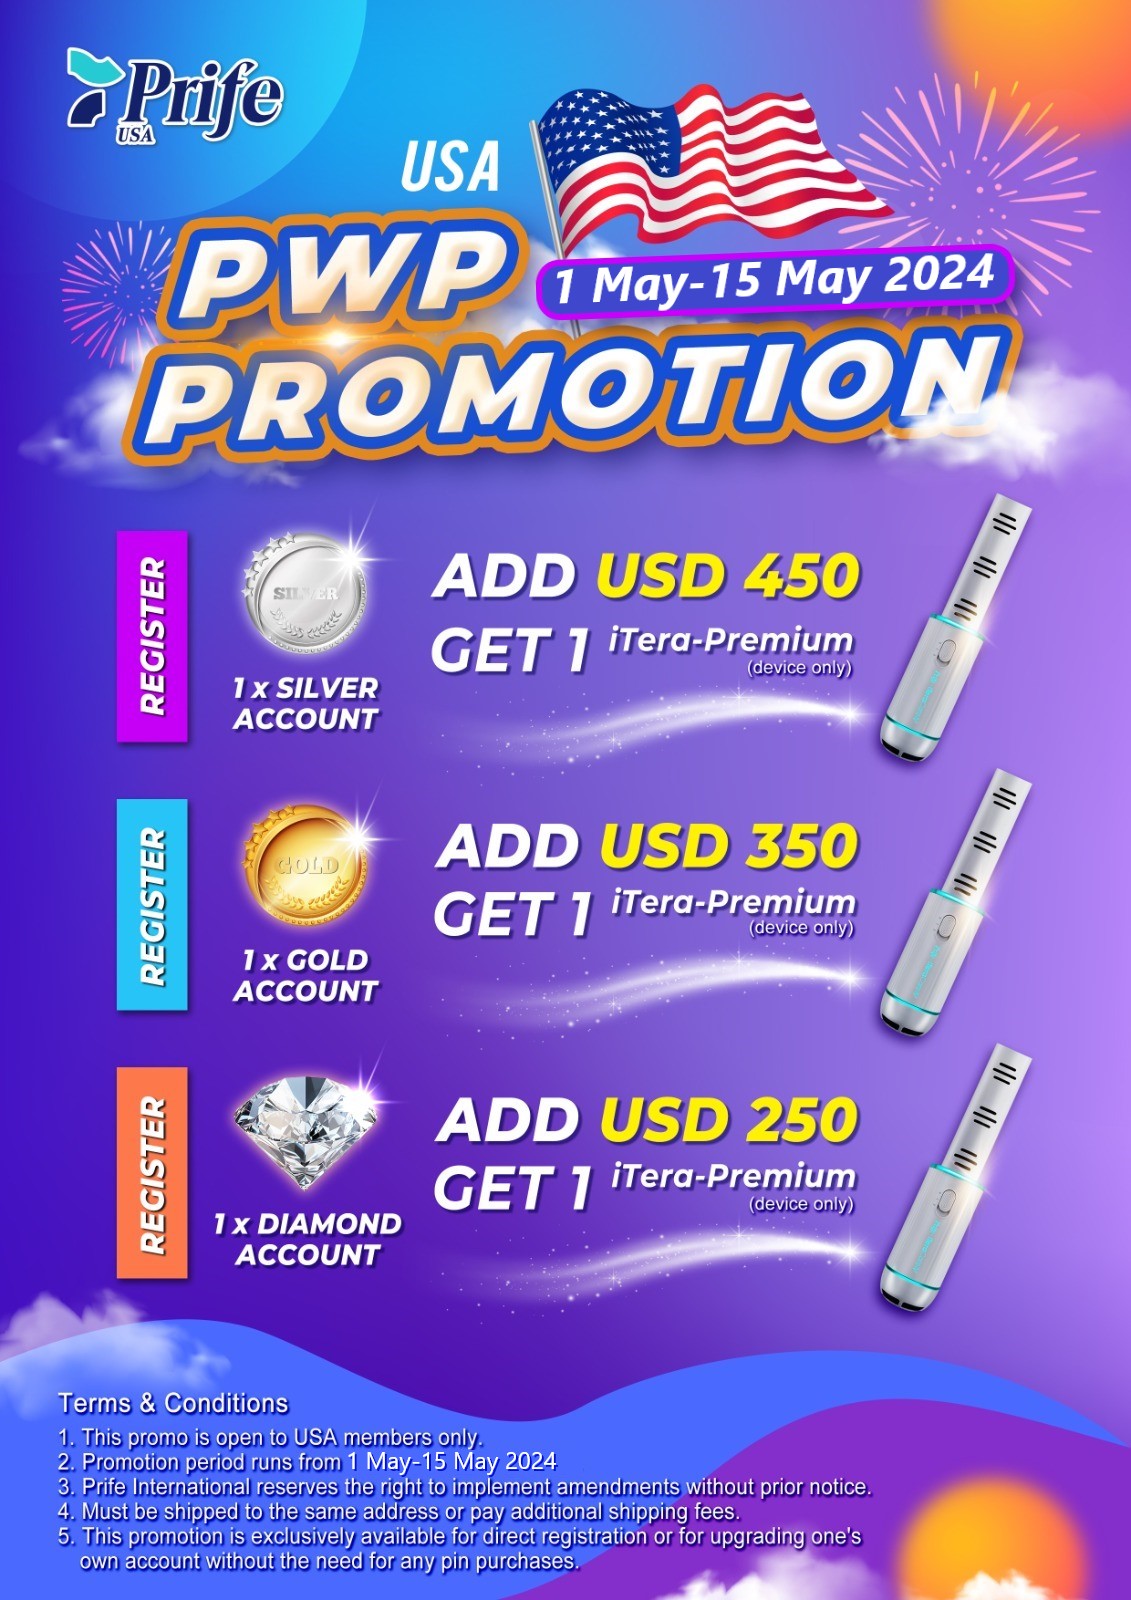 PREMIUM Promo - Extended to May 15th!